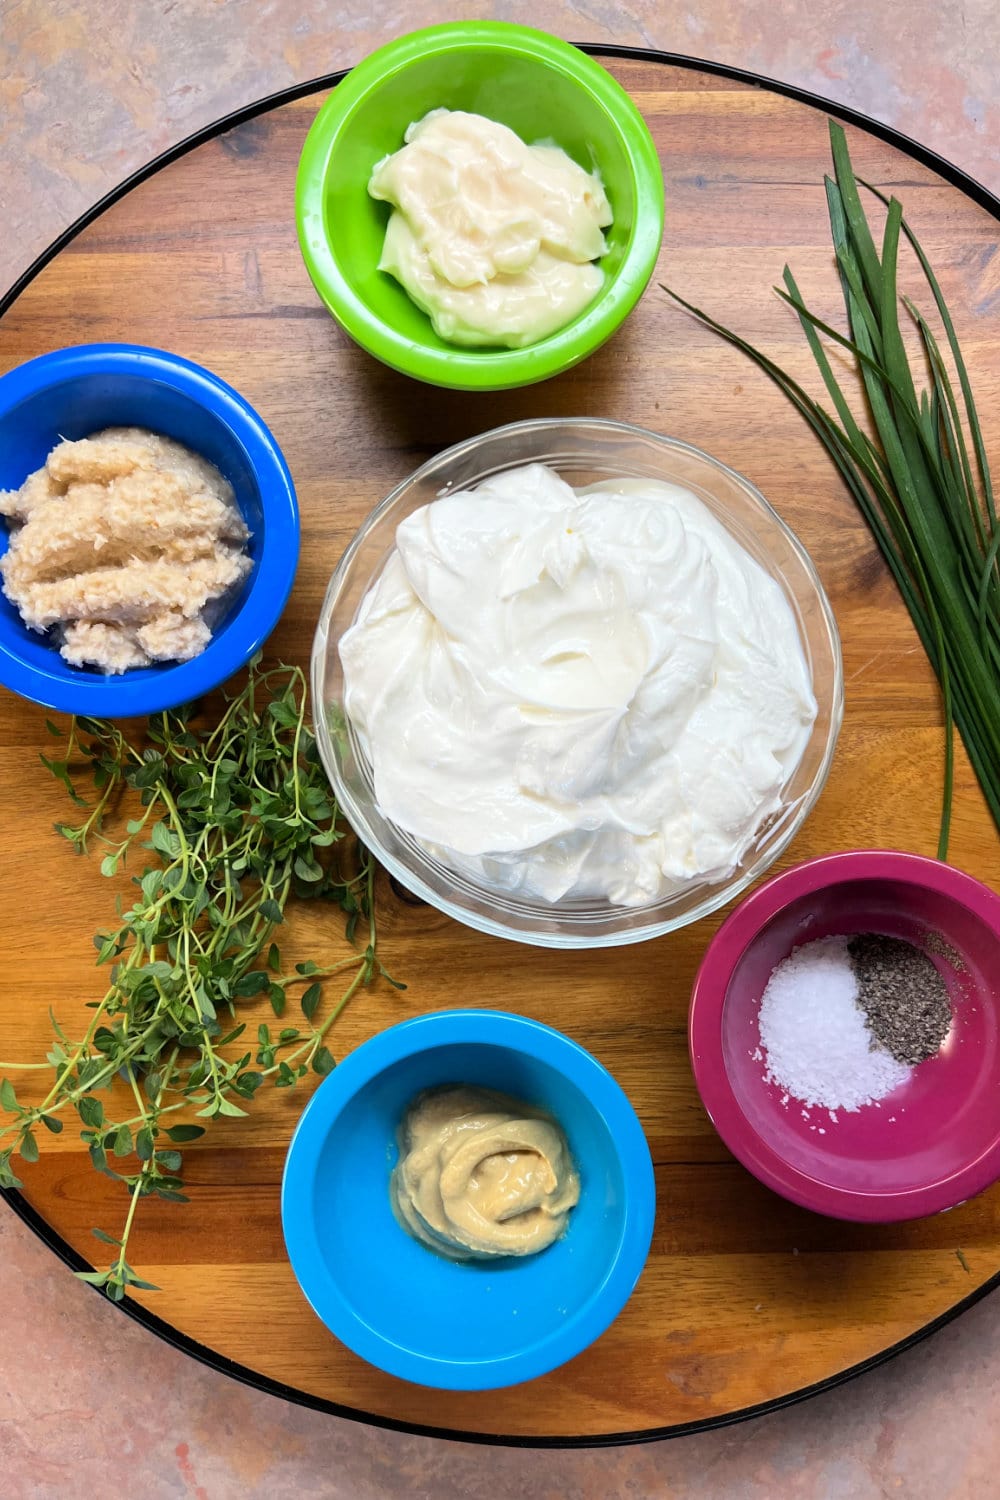 Ingredients laid out for making creamy horseradish sauce. 